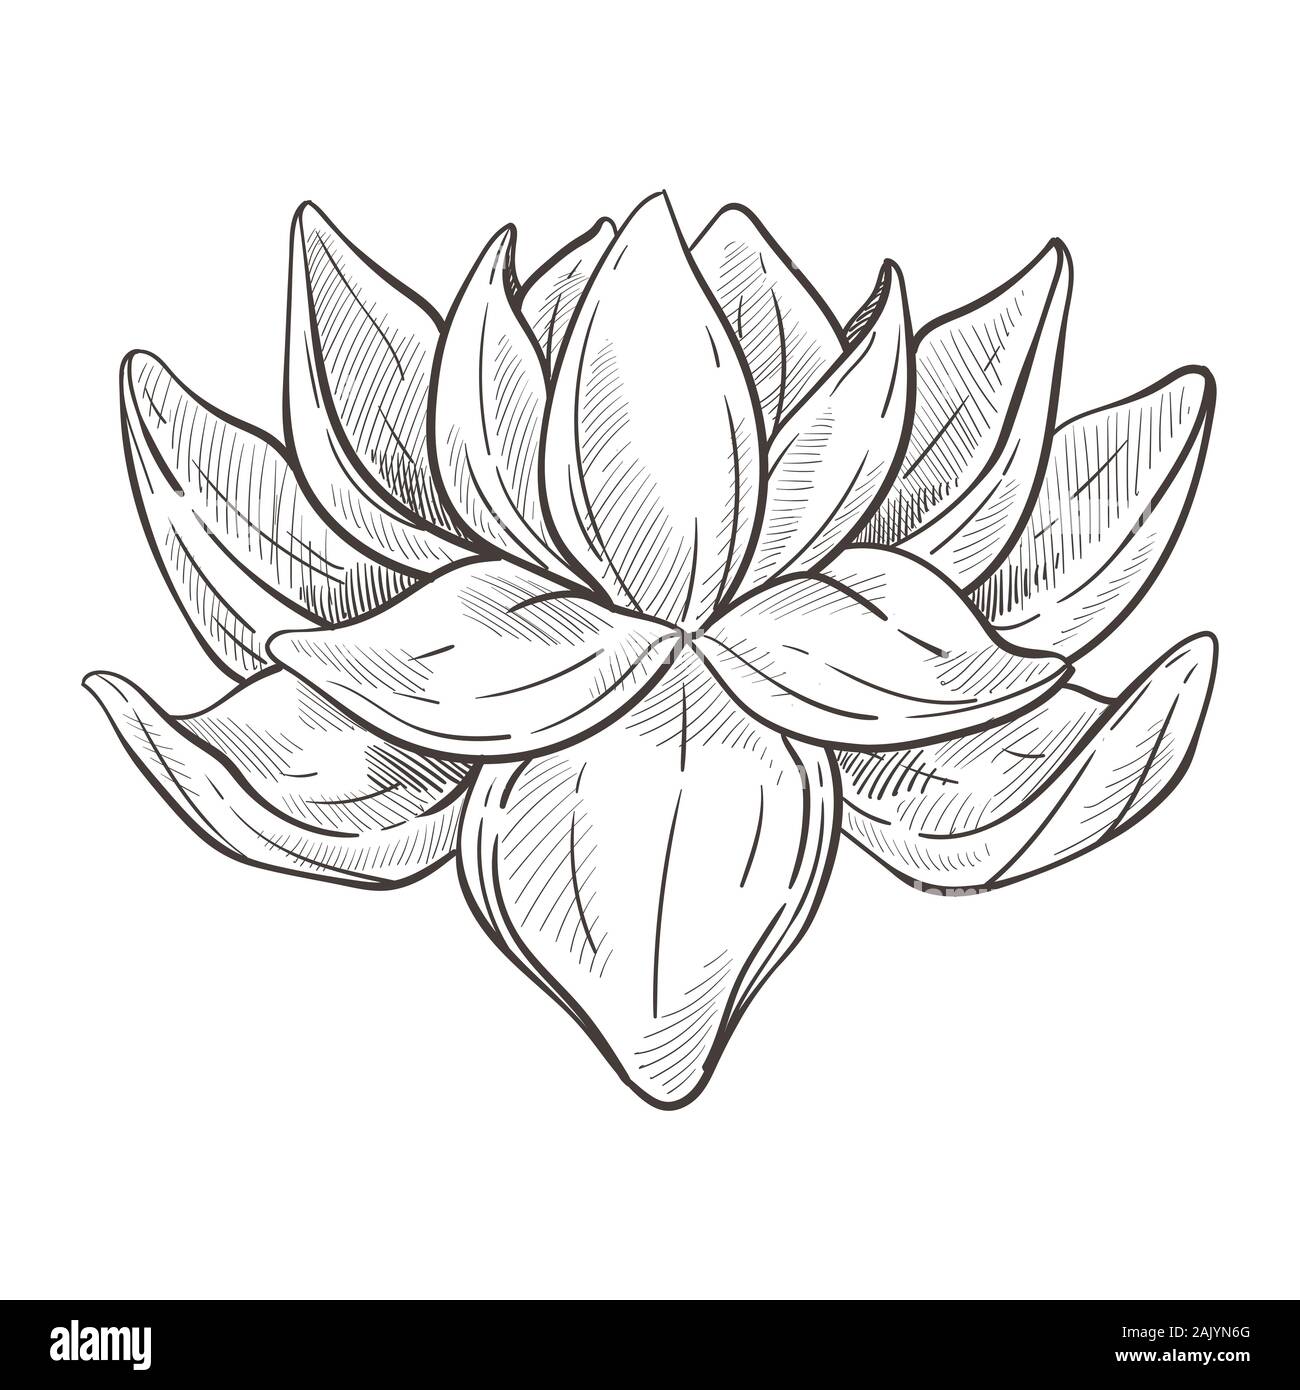 Wild oriental flower or lotus blossom isolated sketch Stock Vector ...